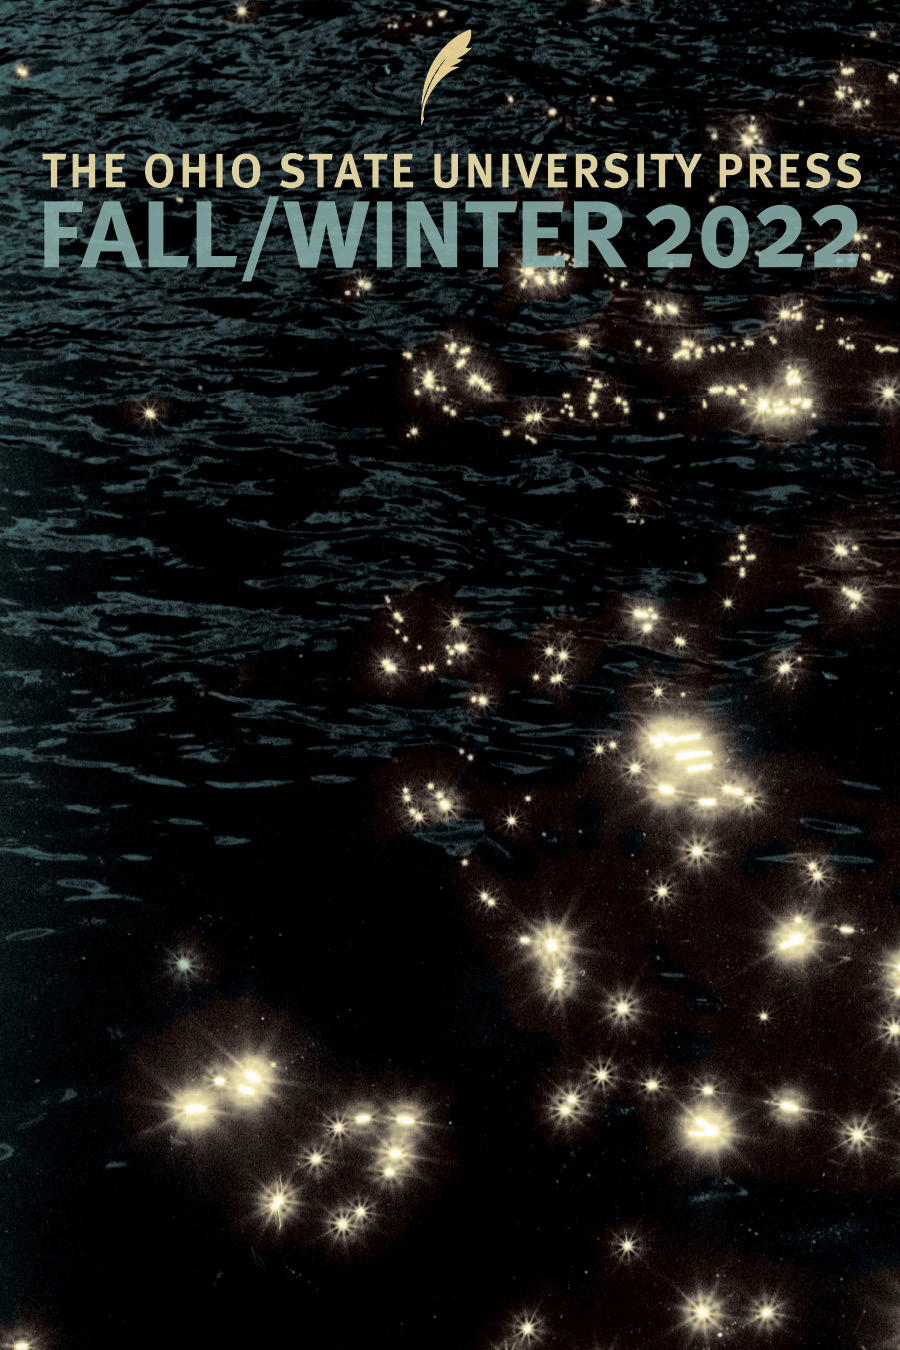 Fall-Winter 2022 seasonal catalog cover showing dark water with pale yellow scattered light reflections that resemble stars, with the press name and quill logo at the top